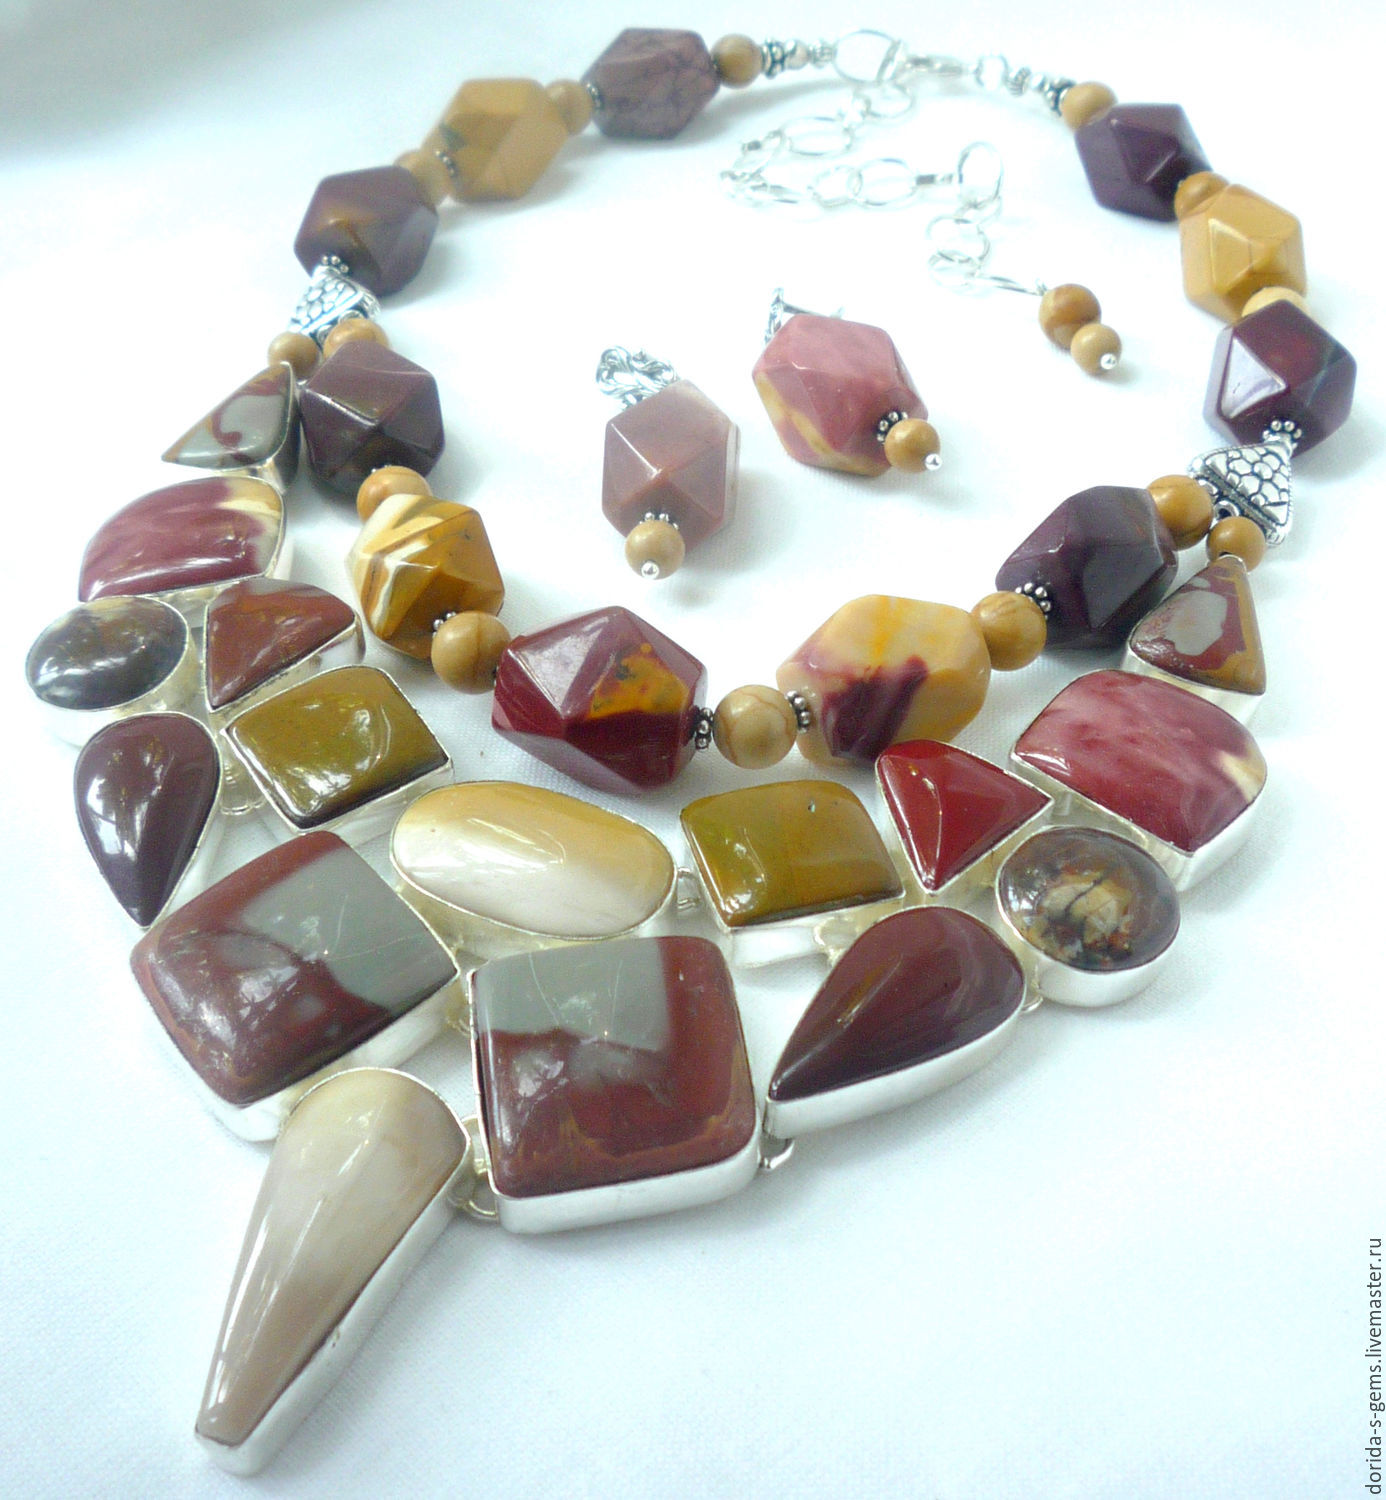 necklace, designer necklace, necklace for every day, a necklace made of Jasper, an elegant choker necklace with Jasper, necklace for gift, beads Jasper necklace mookaite, mookaite beads, beads
